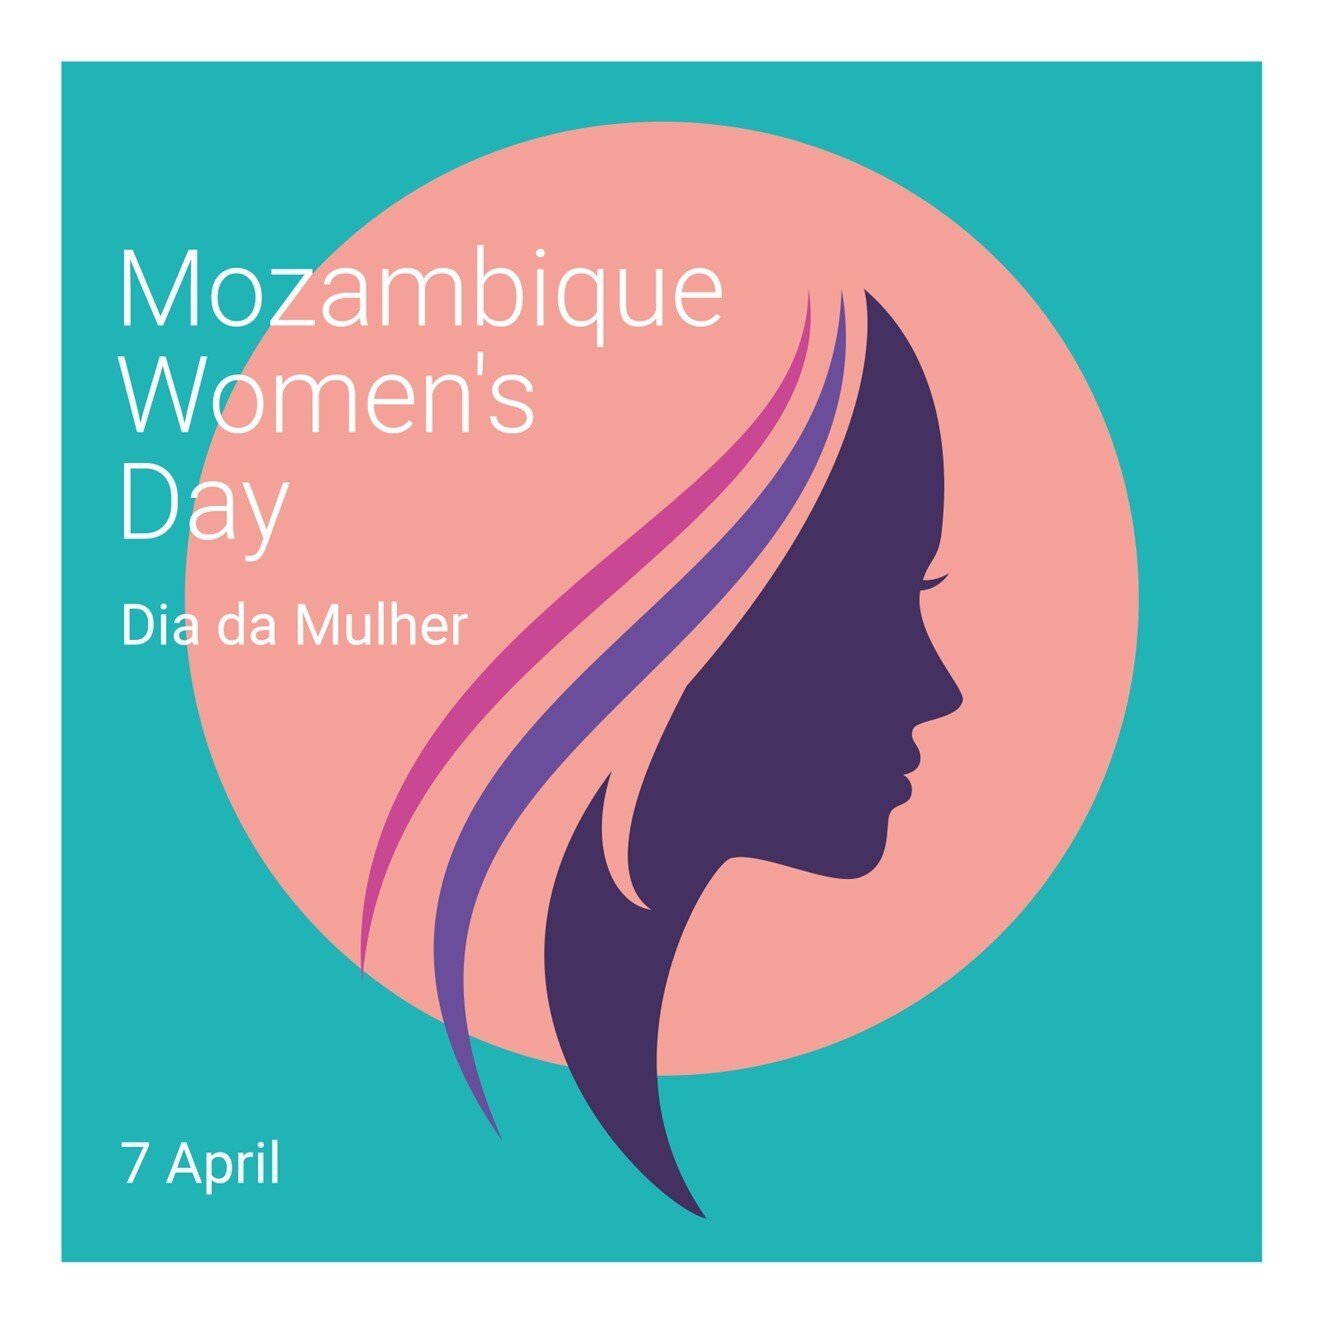 Wishing the incredible women of Mozambique, a Happy Women&rsquo;s Day, from all at IFS.
ㅤ
#IFSAfrica #closertohome #mozambiquewomensday #strongwomen #mozambique #7april